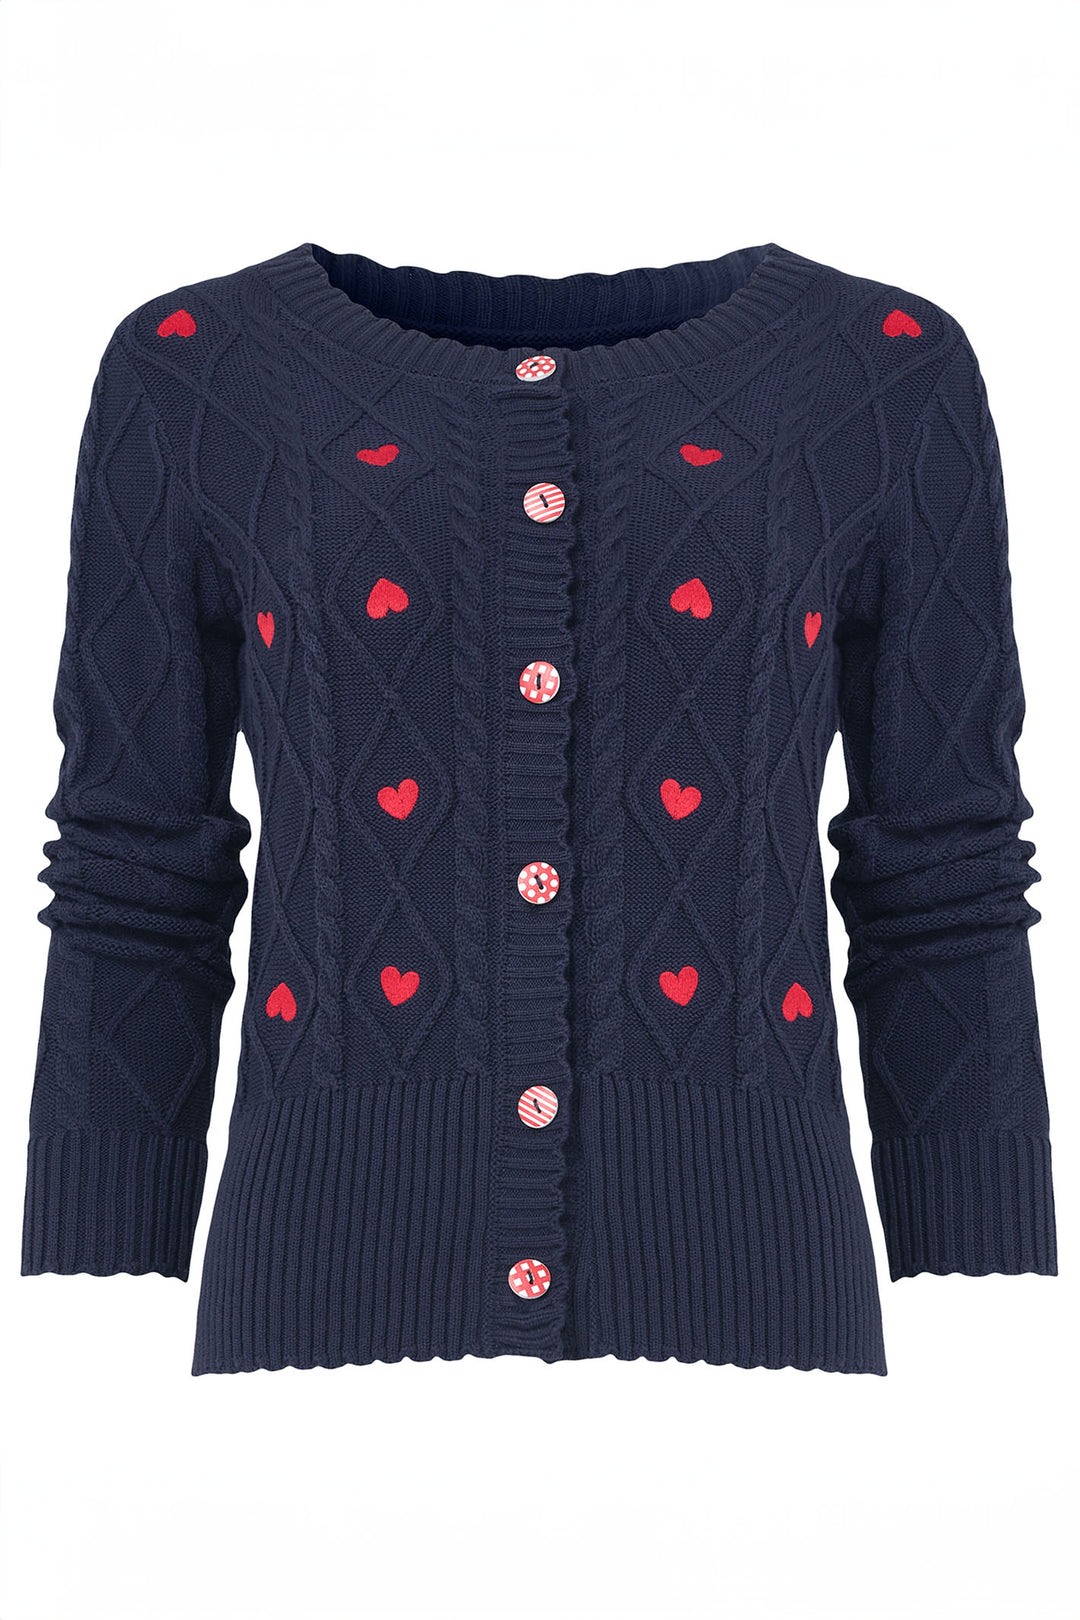 Joe Browns WK719A All Heart Navy Embroidered Cardigan - Experience Boutique